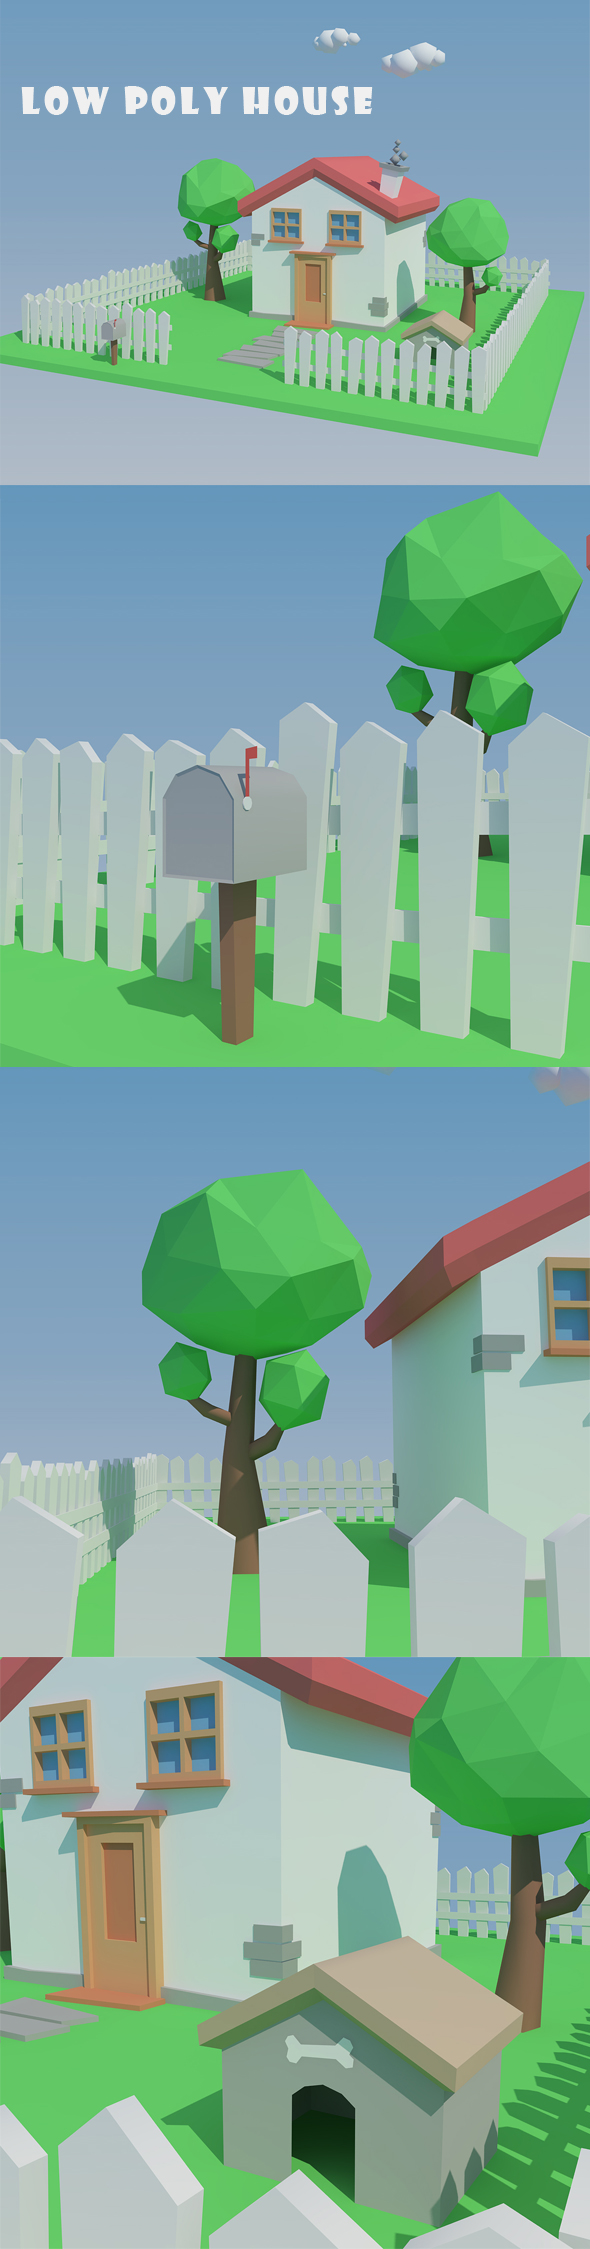 Low Poly House - 3Docean 16414241